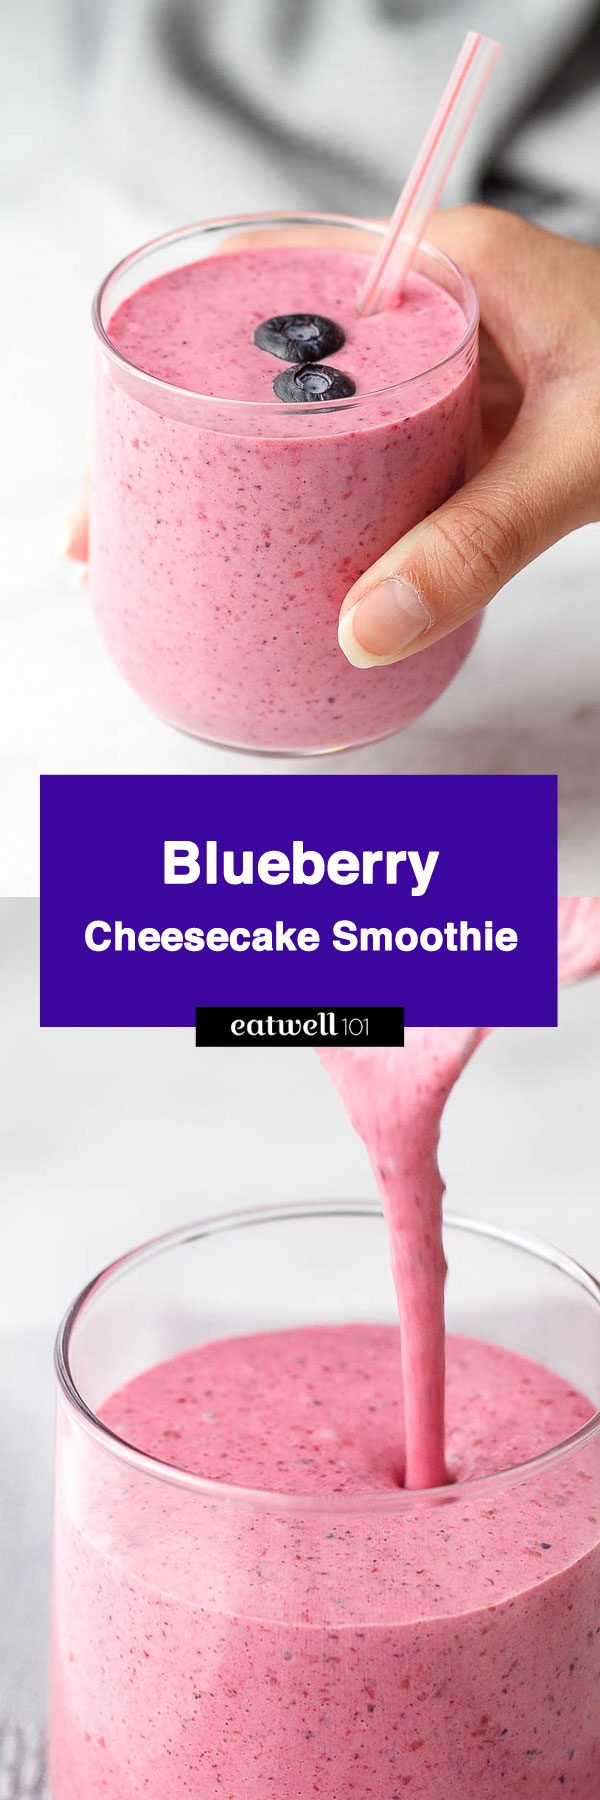 Blueberry Cheesecake Smoothie - Rich and creamy, this low carb smoothie whips up in just minutes. 